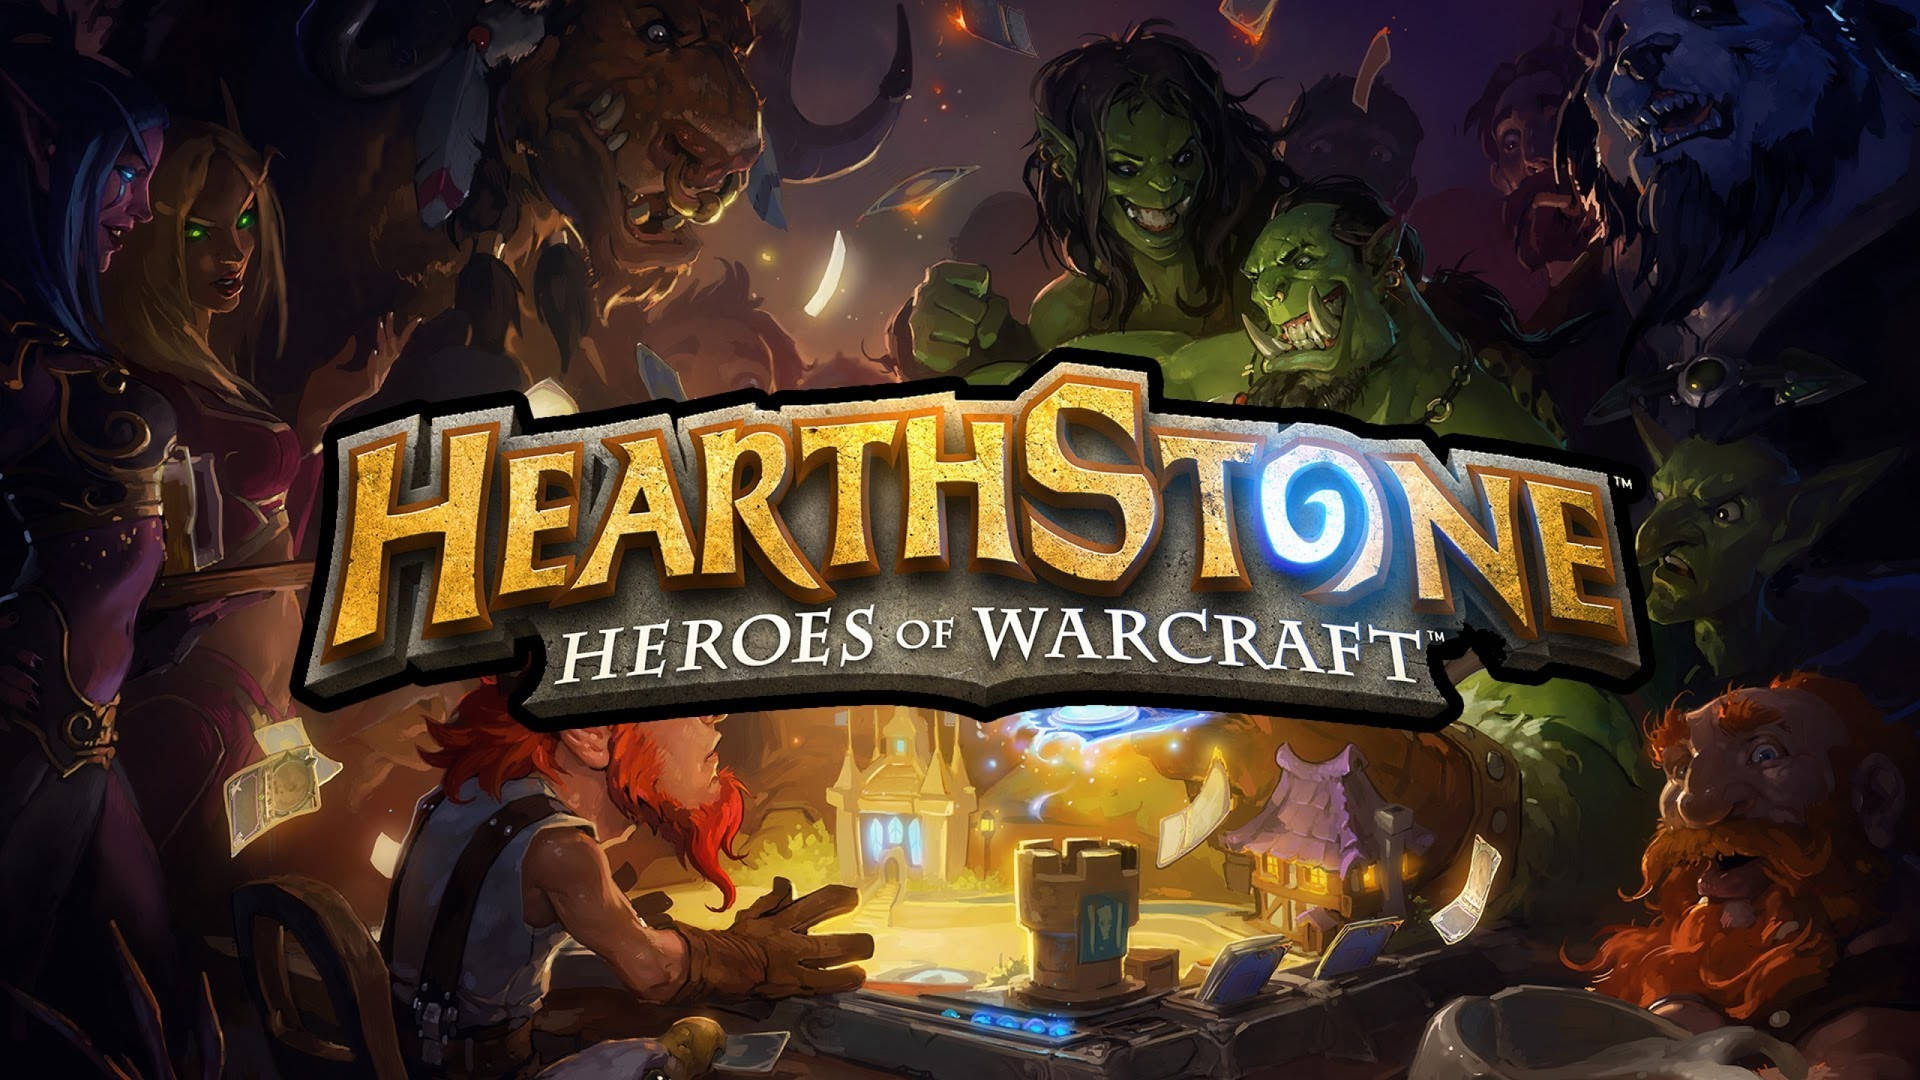 2560 X 1440 Hearthstone Heroes Of Warcraft